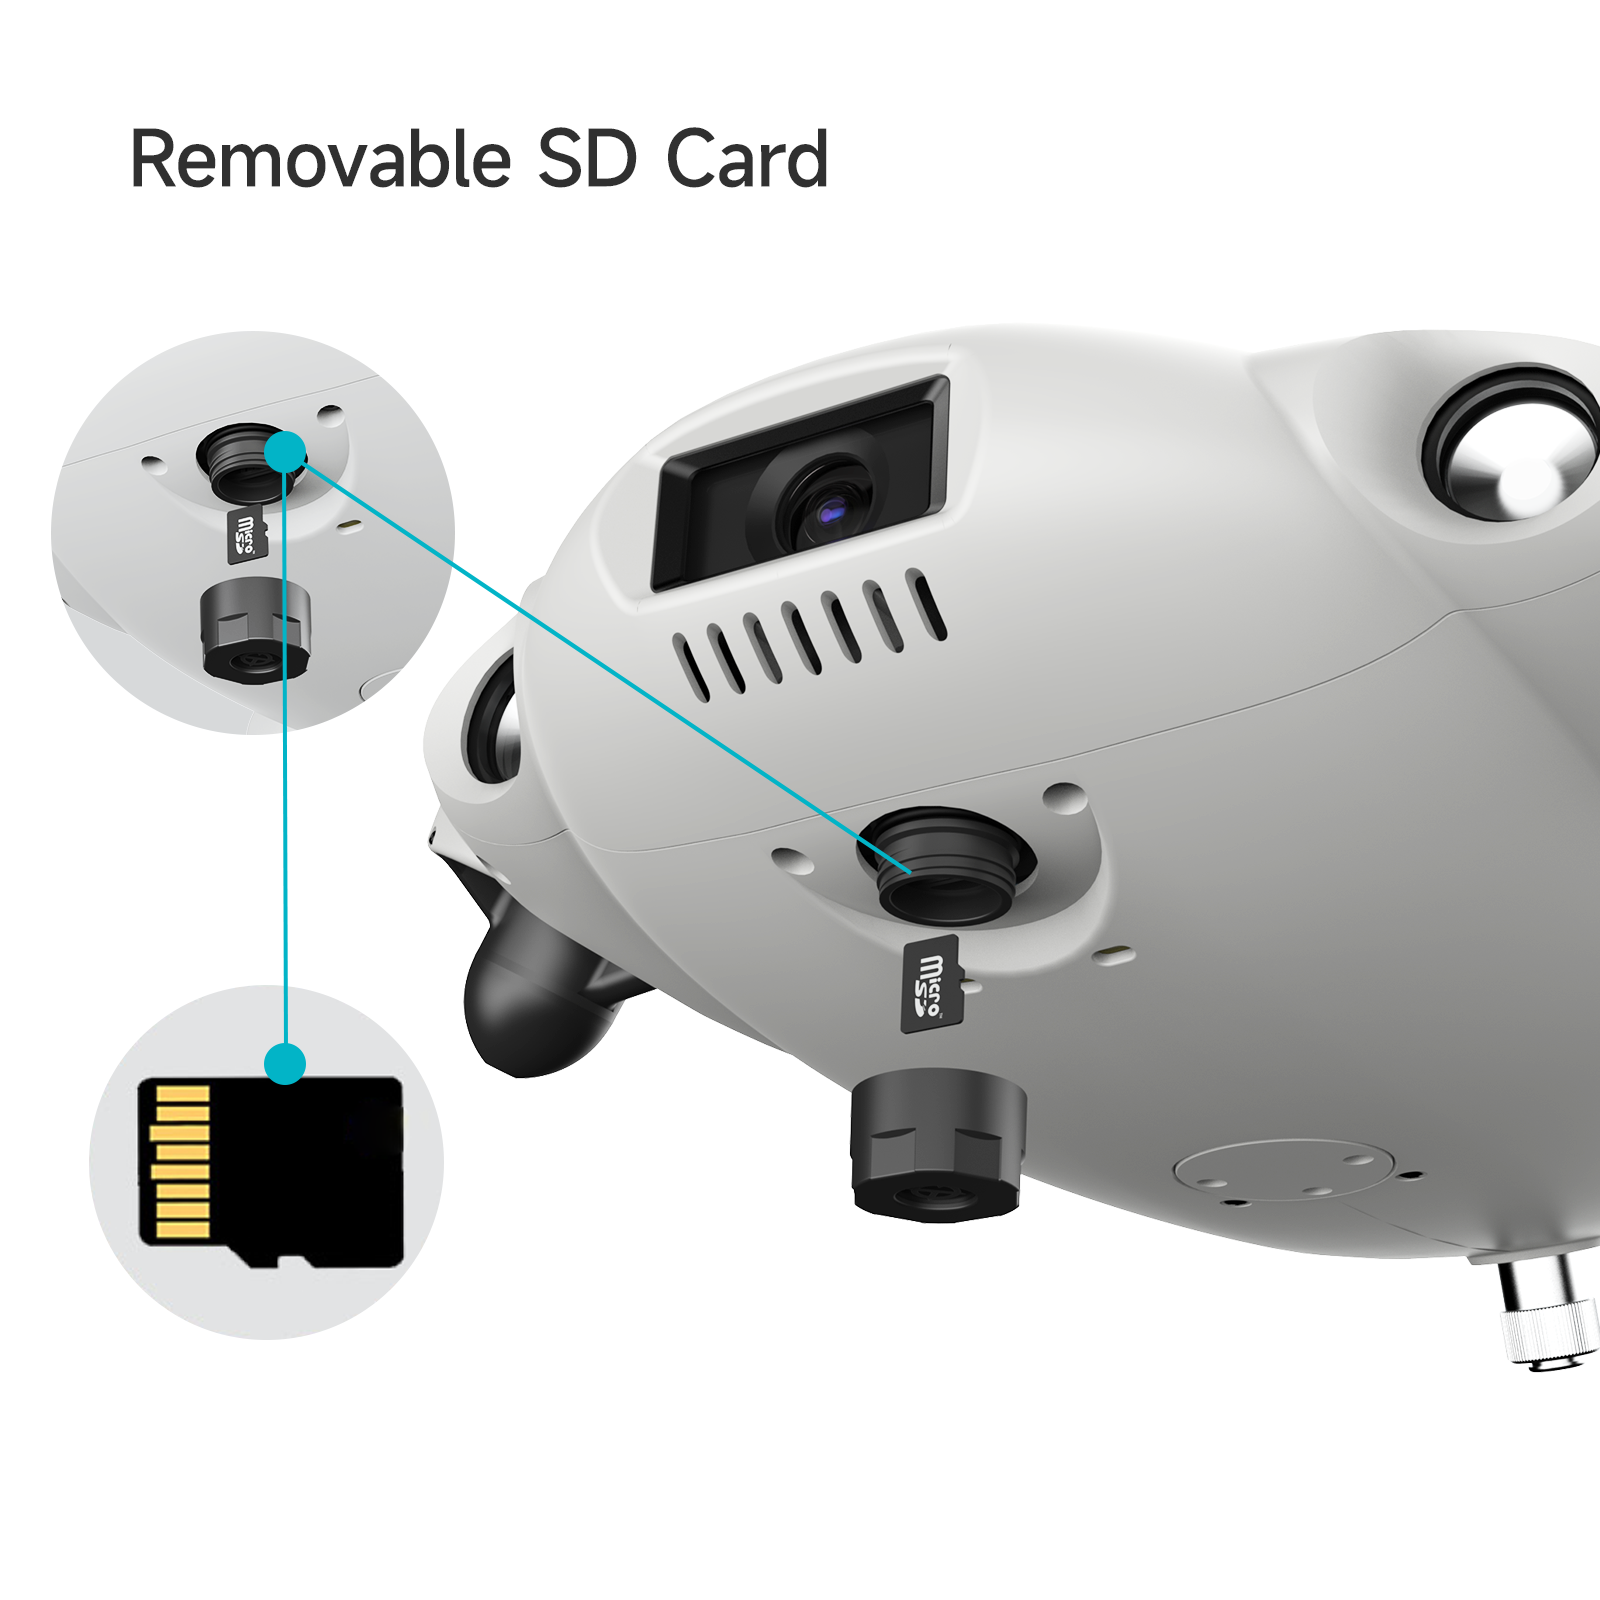 Qysea - FiFish V-EVO Standard package Removable SD card